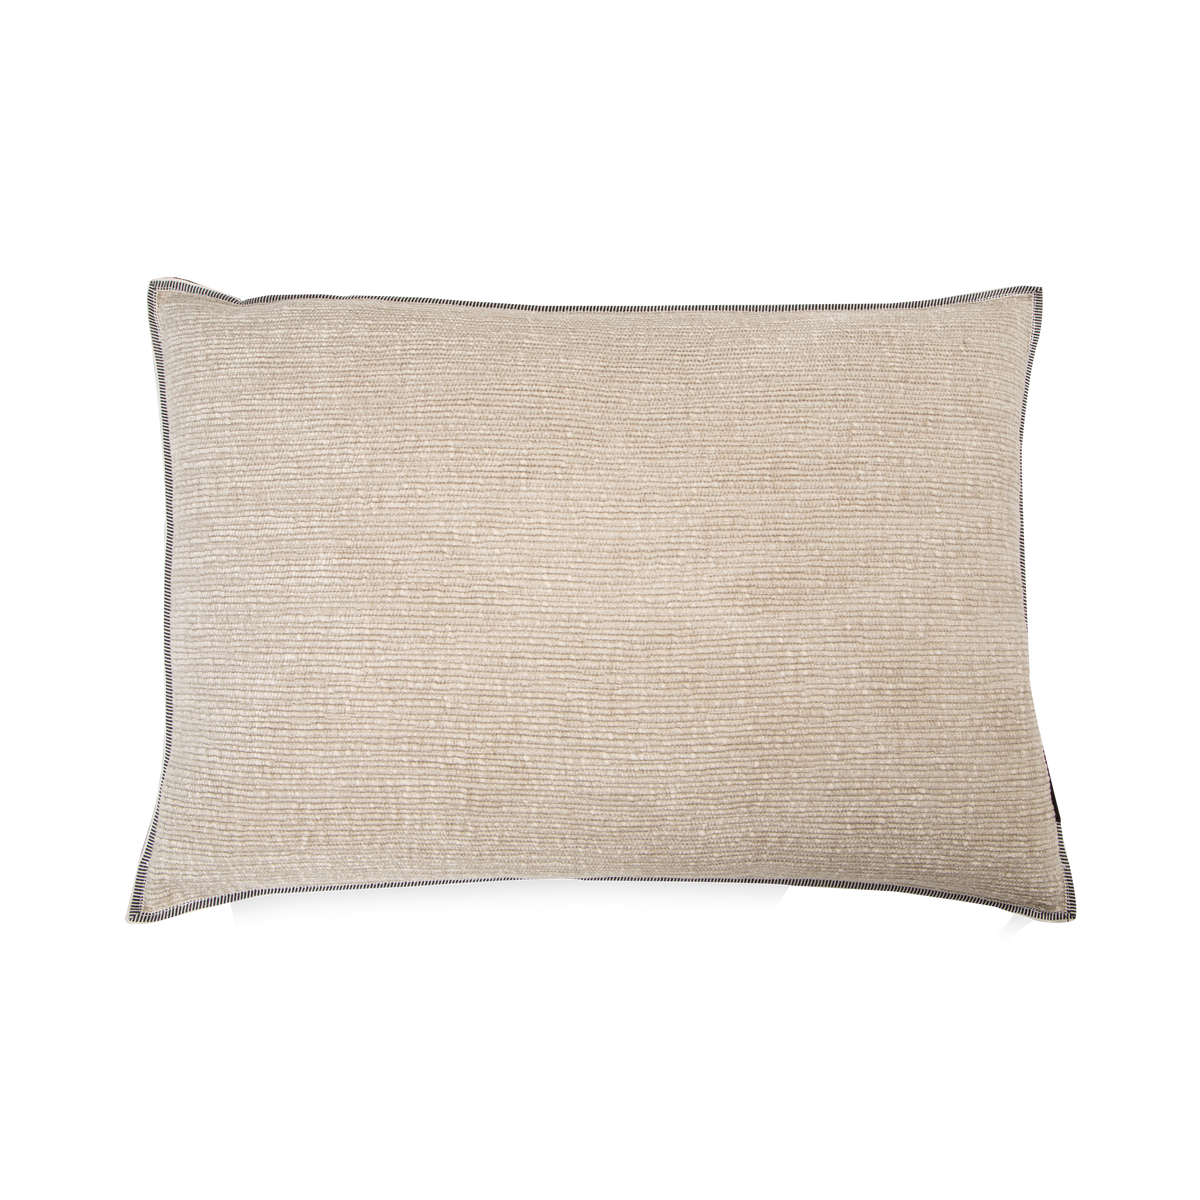 Texturally driven, the Ribbed Pillow is woven with a gorgeous palette beige which provides a welcoming composure to any sofa or bed it is paired with.